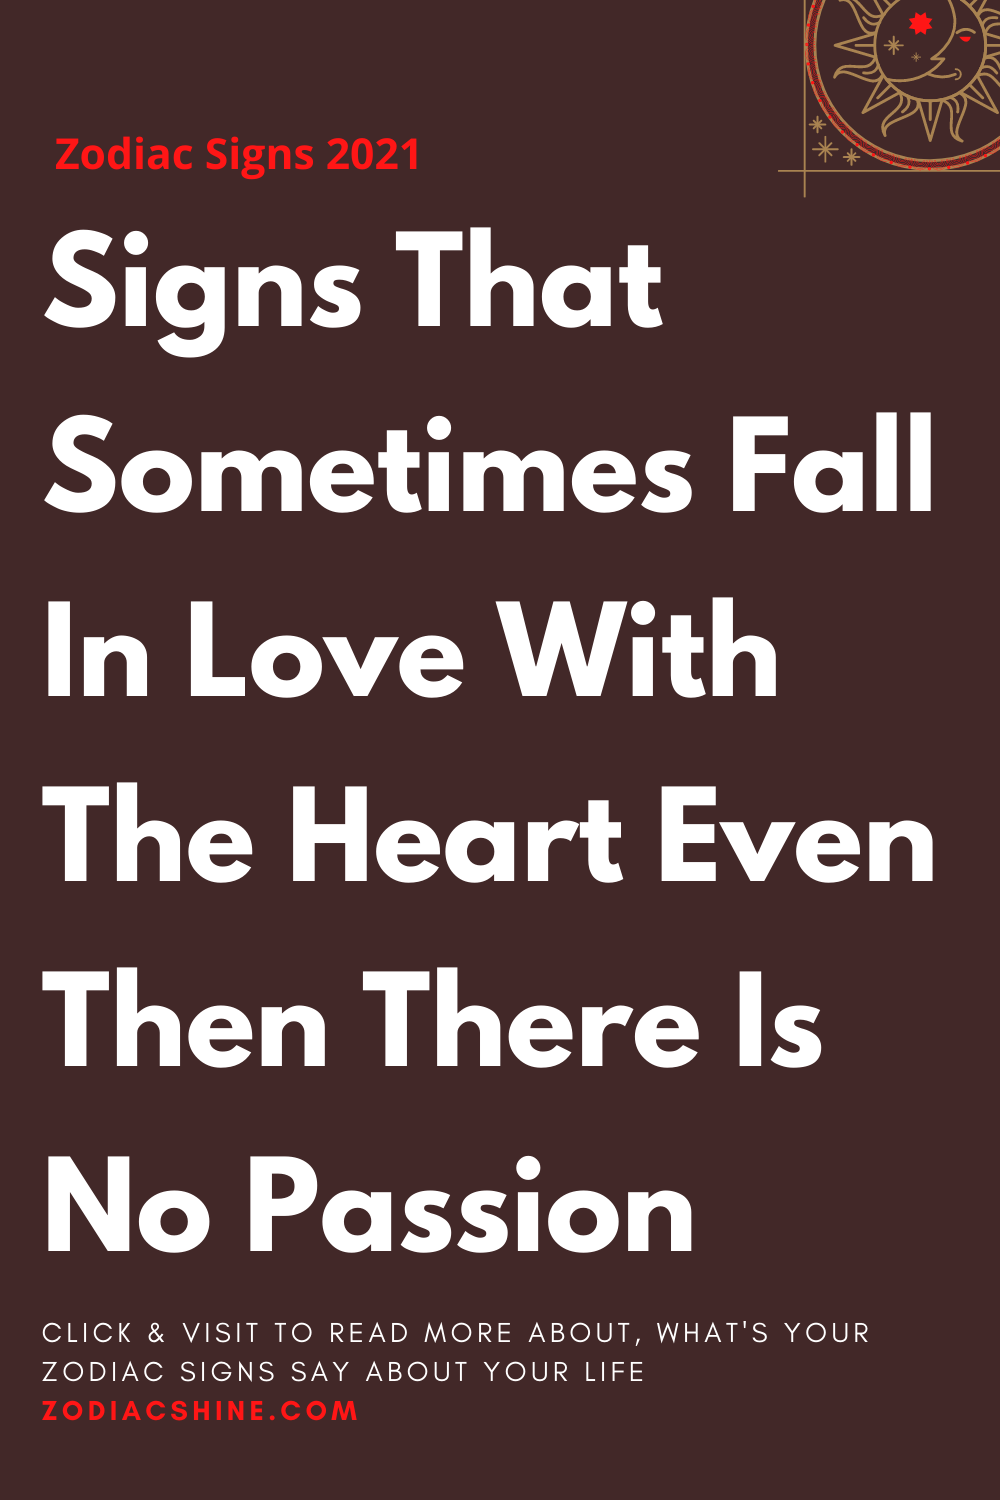 Signs That Sometimes Fall In Love With The Heart Even Then There Is No Passion